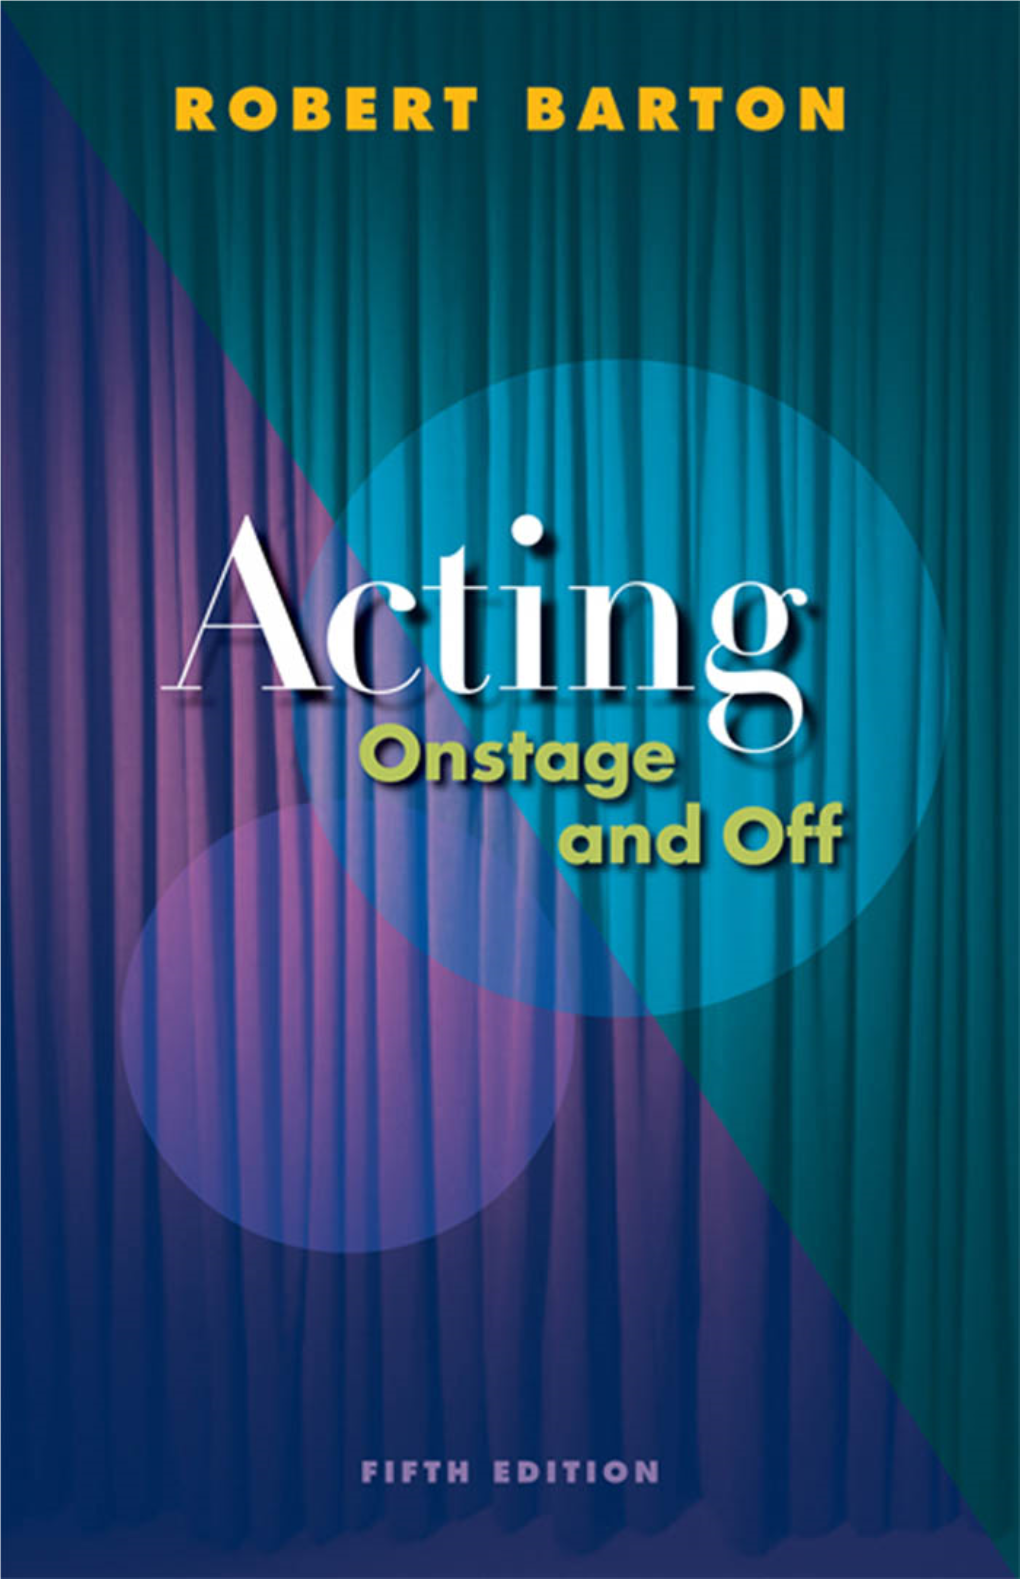 ACTING: Onstage and Off